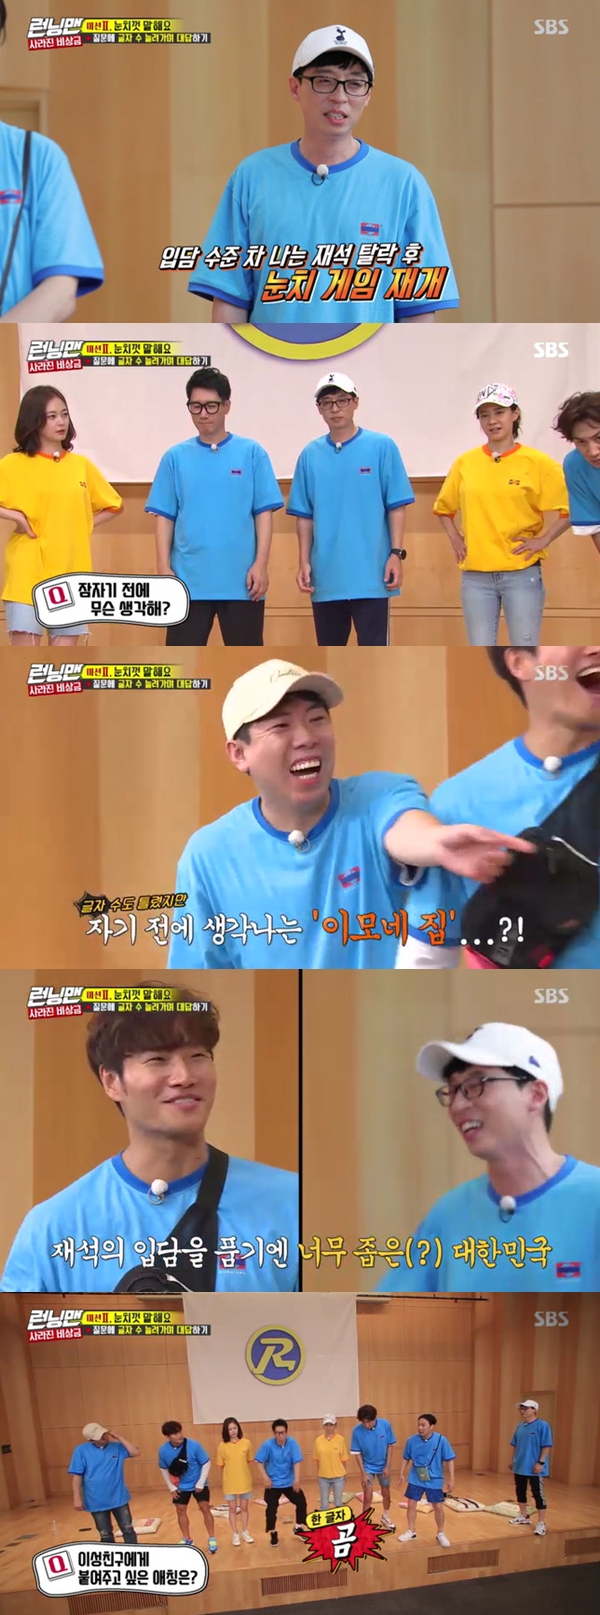 Yoo Jae-Suk has taken a blind faith in his dedication.On SBS Running Man broadcast on August 18, Tell me up game was held with the second mission.This is a game mission that has to answer the question by increasing the number of letters, and Wing it emperor Yoo Jae-Suk, who was blocked by Song Ji-hyo, was unable to speak properly and dropped out early.Yoo Jae-Suk, who was missing from the game, watched the members game and showed a series of terrible Wing it to surprise the members.bak-beauty